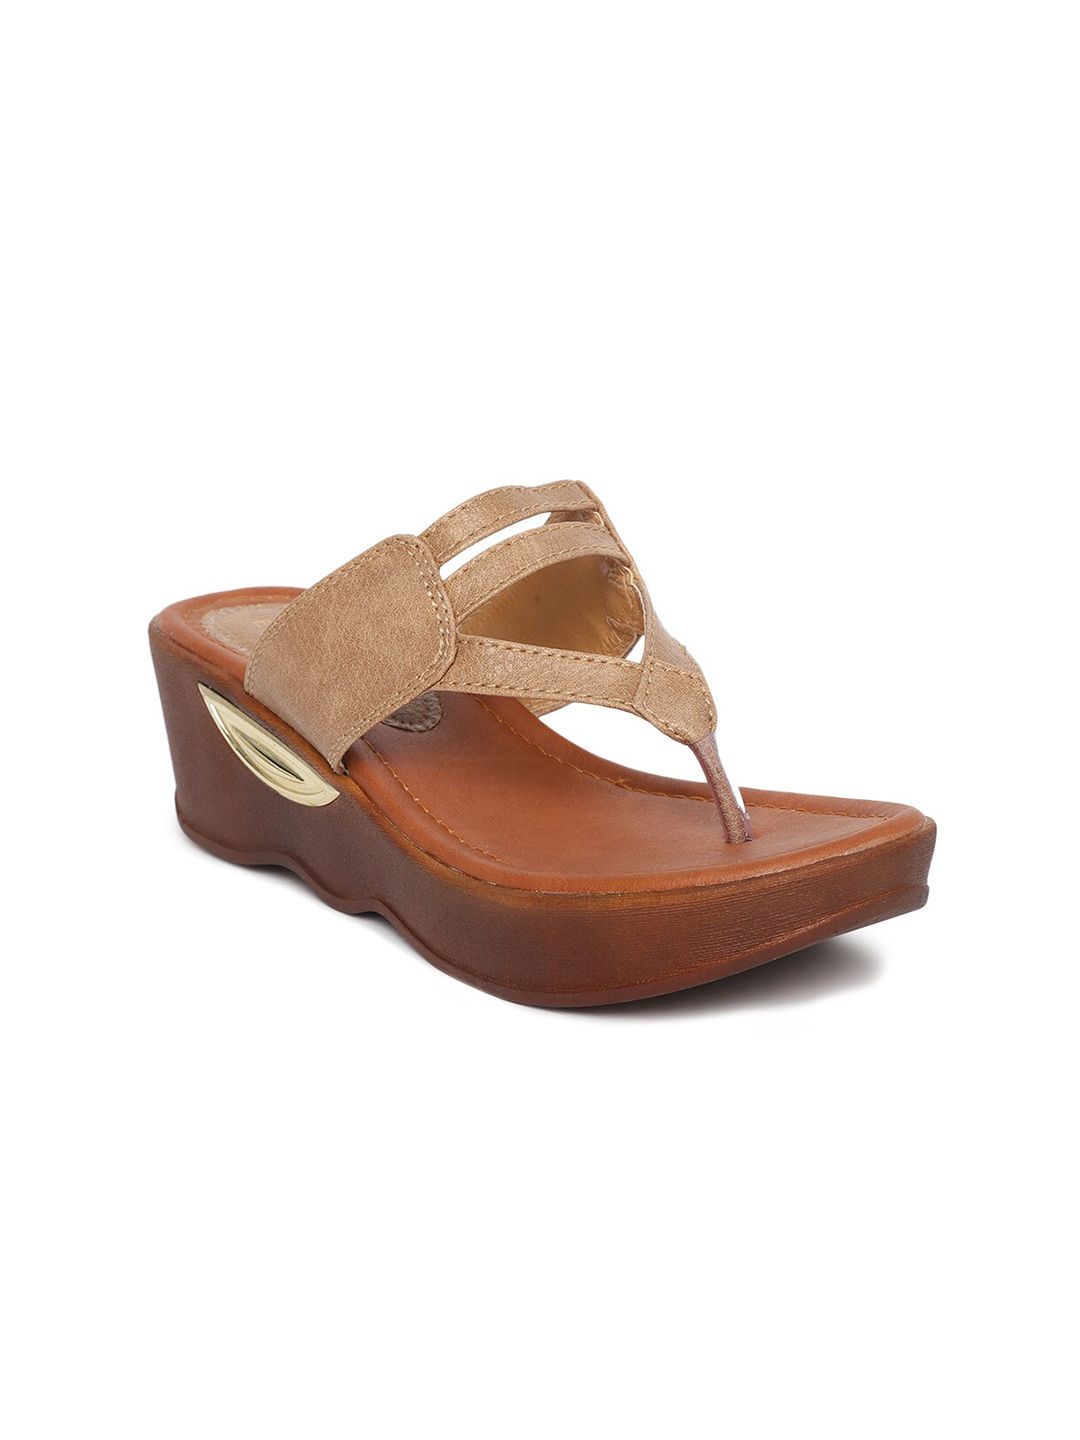 EVERLY Women Beige Wedges Price in India